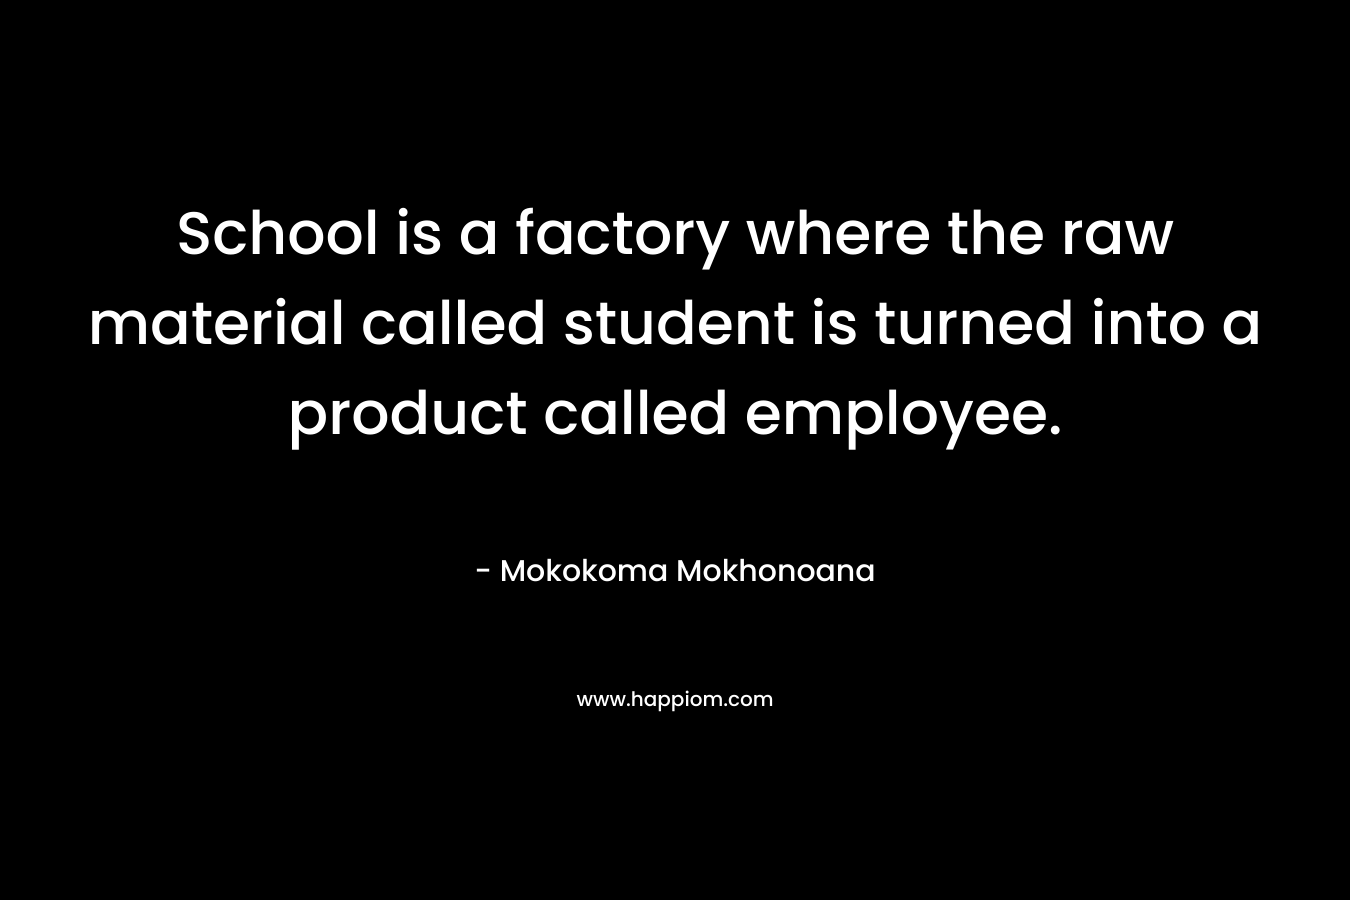 School is a factory where the raw material called student is turned into a product called employee. – Mokokoma Mokhonoana